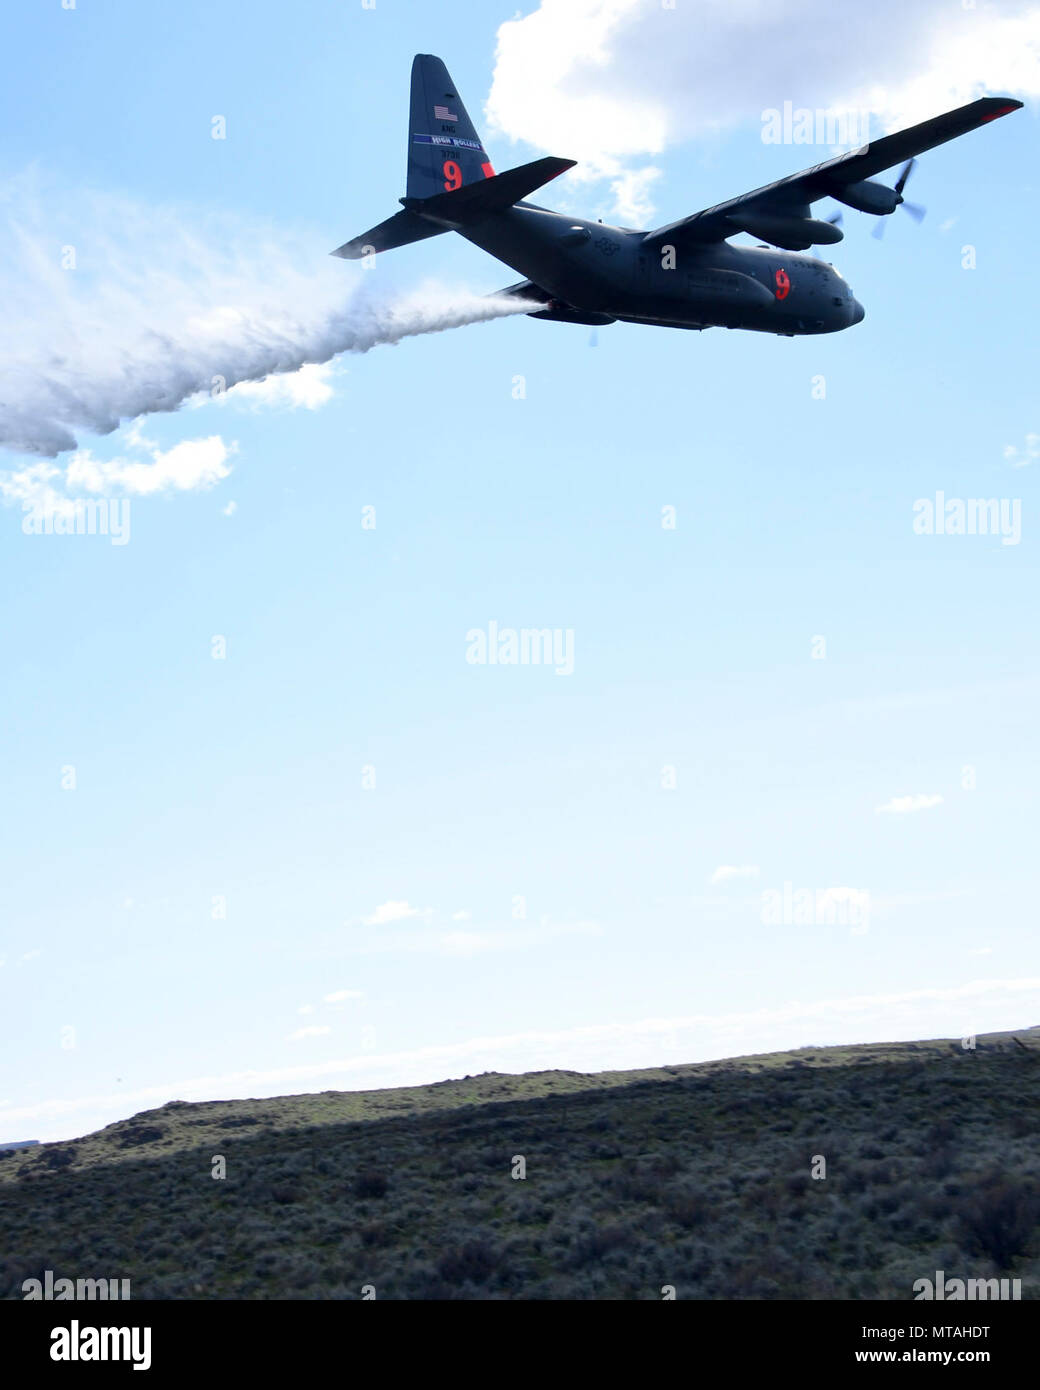 A C130h aircraft loaded with the MAFFS (Modular Airborne Fire Fighting System) from the 152rd Airlift Wing of Reno, Nevada drops a water line while training to contain wildfires just outside Boise, Idaho. April 21, 2017. More than 400 personnel of four C-130 Guard and Reserve units — from California, Colorado, Nevada and Wyoming, making up the Air Expeditionary Group — are in Boise, Idaho for the week-long wildfire training and certification sponsored by the U.S. Stock Photo